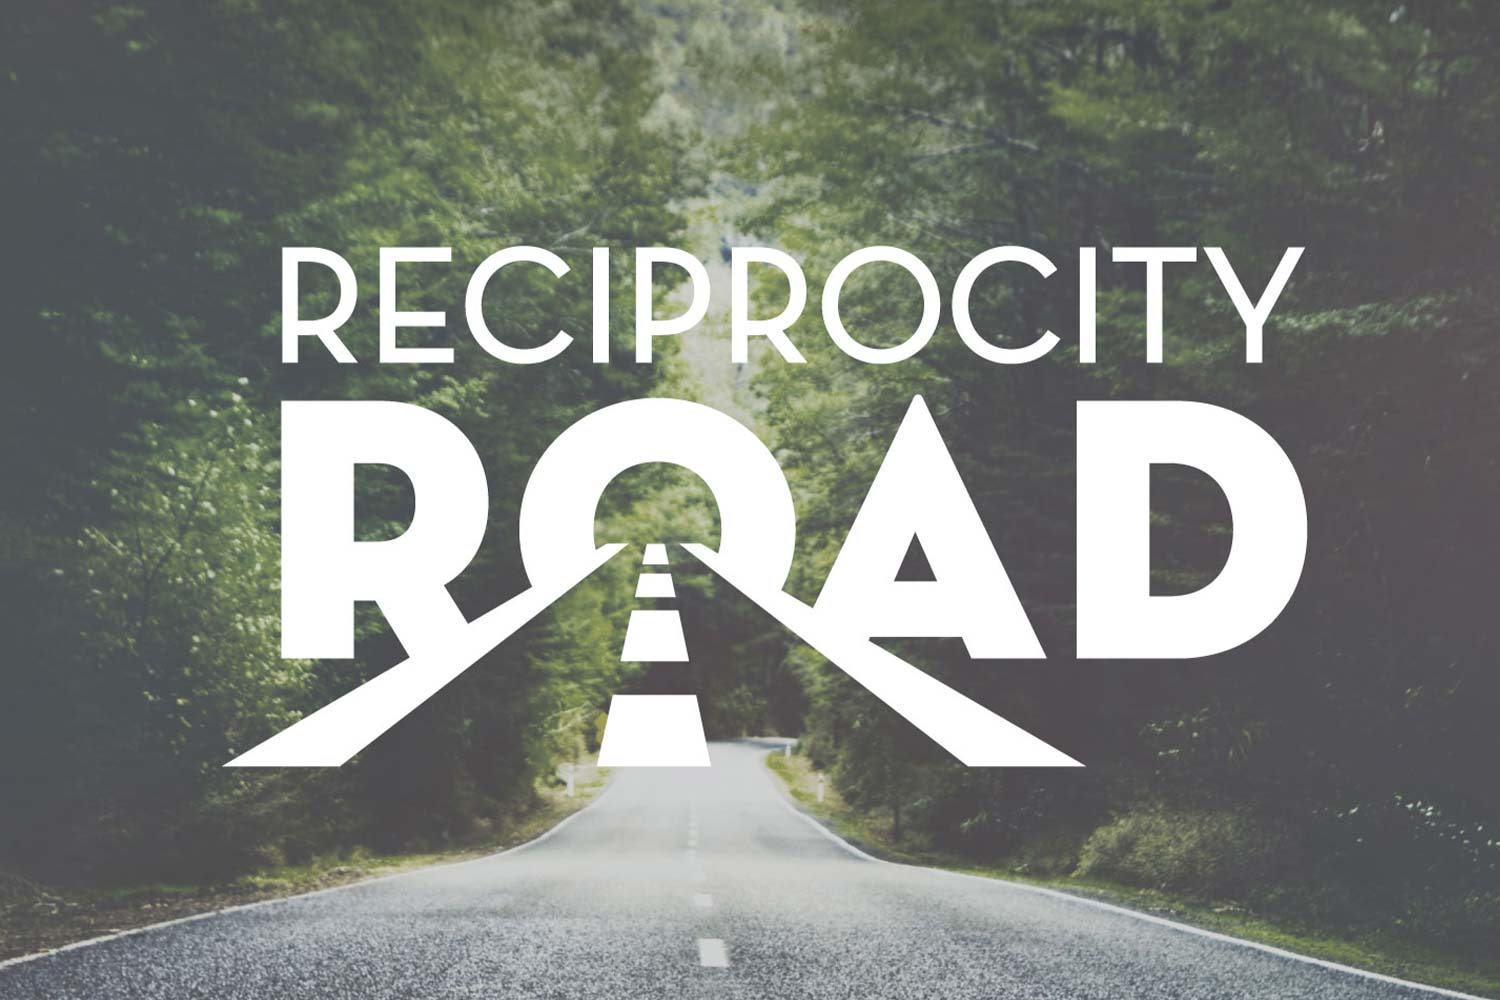 Reciprocity Road logo super imposed over a street lined by trees.